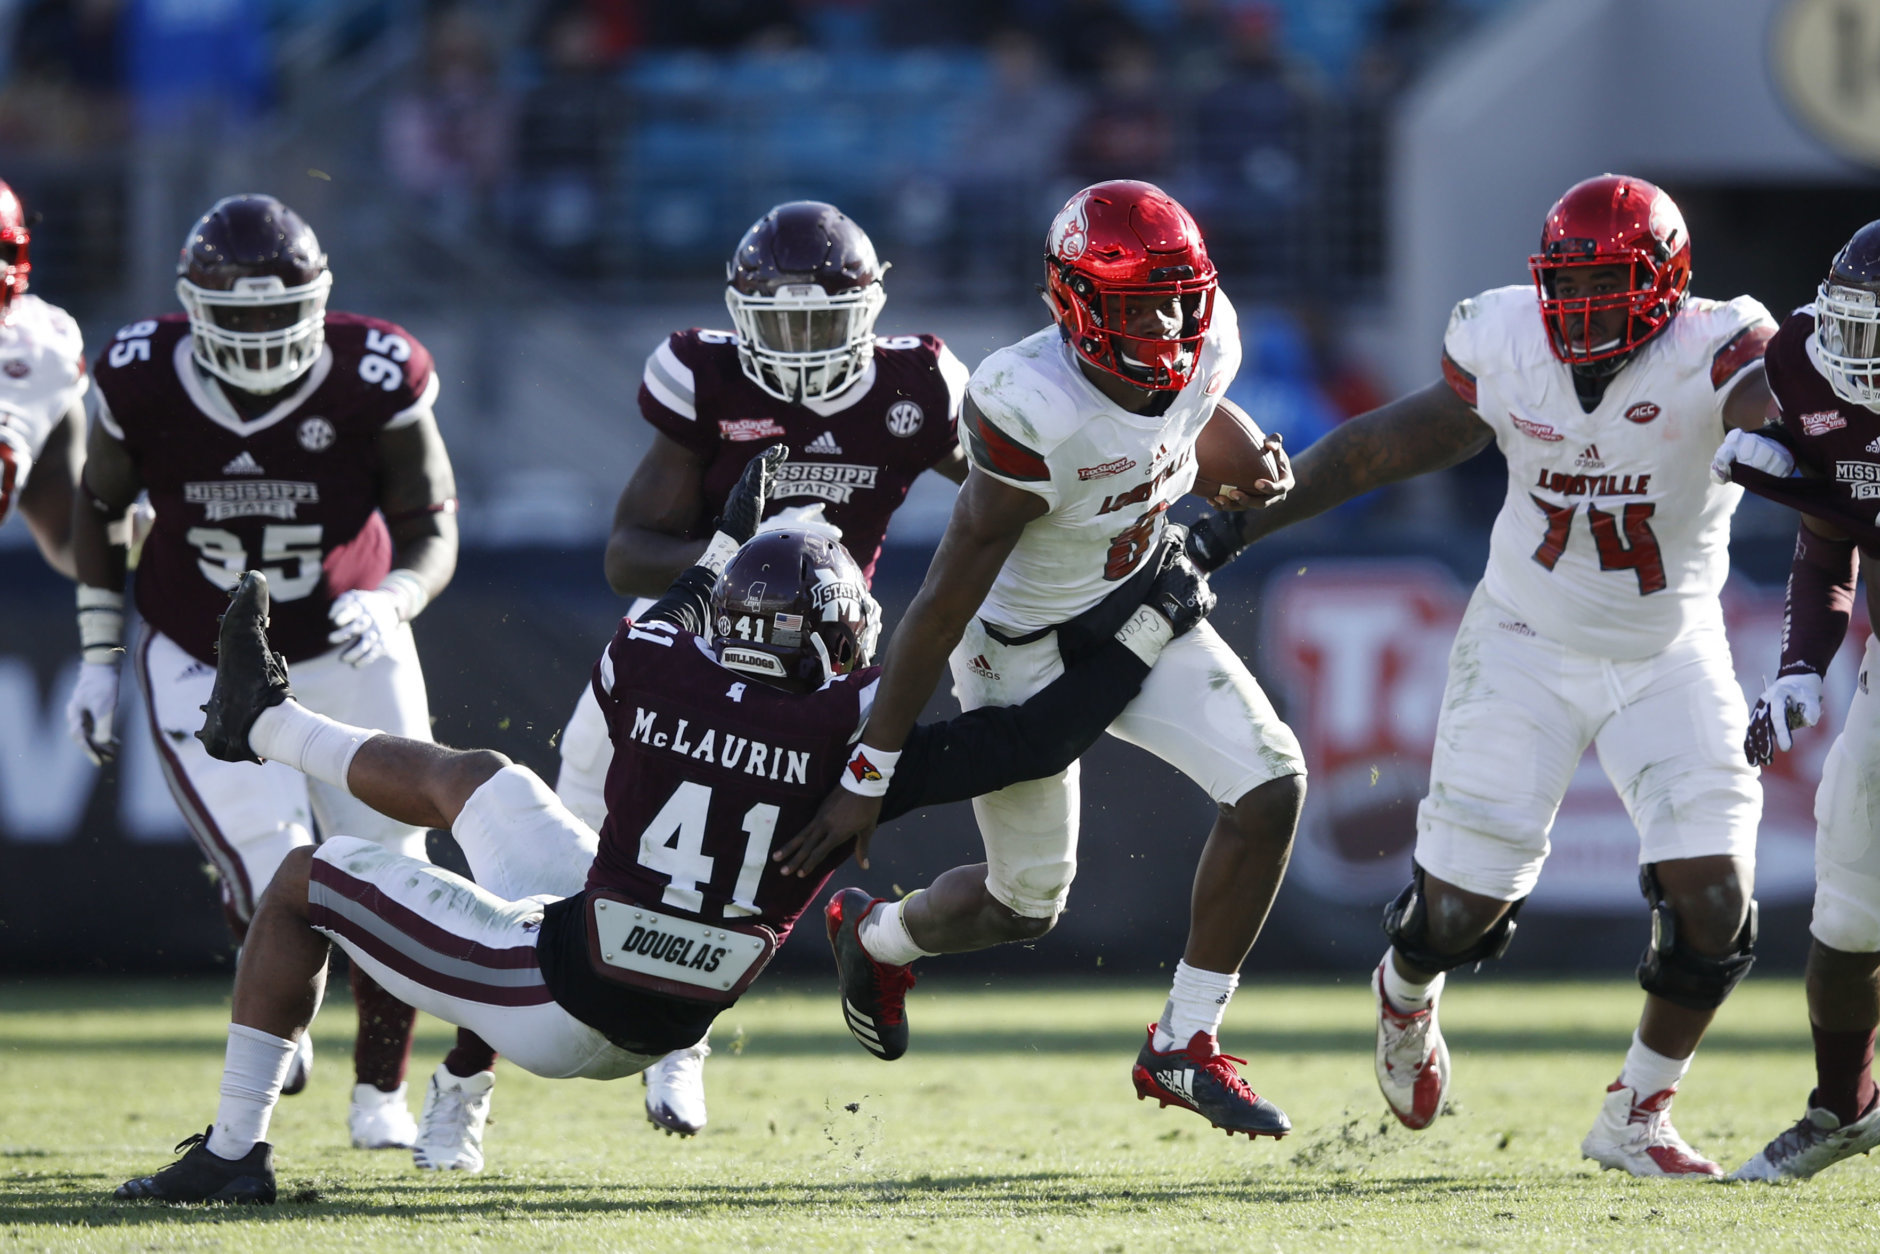 JACKSONVILLE, FL - DECEMBER 30: Mark McLaurin #41 of the Mississippi State Bulldogs tackles Lamar Jackson #8 of the Louisville Cardinals in the fourth quarter of the TaxSlayer Bowl at EverBank Field on December 30, 2017 in Jacksonville, Florida. The Bulldogs won 31-27. (Photo by Joe Robbins/Getty Images)